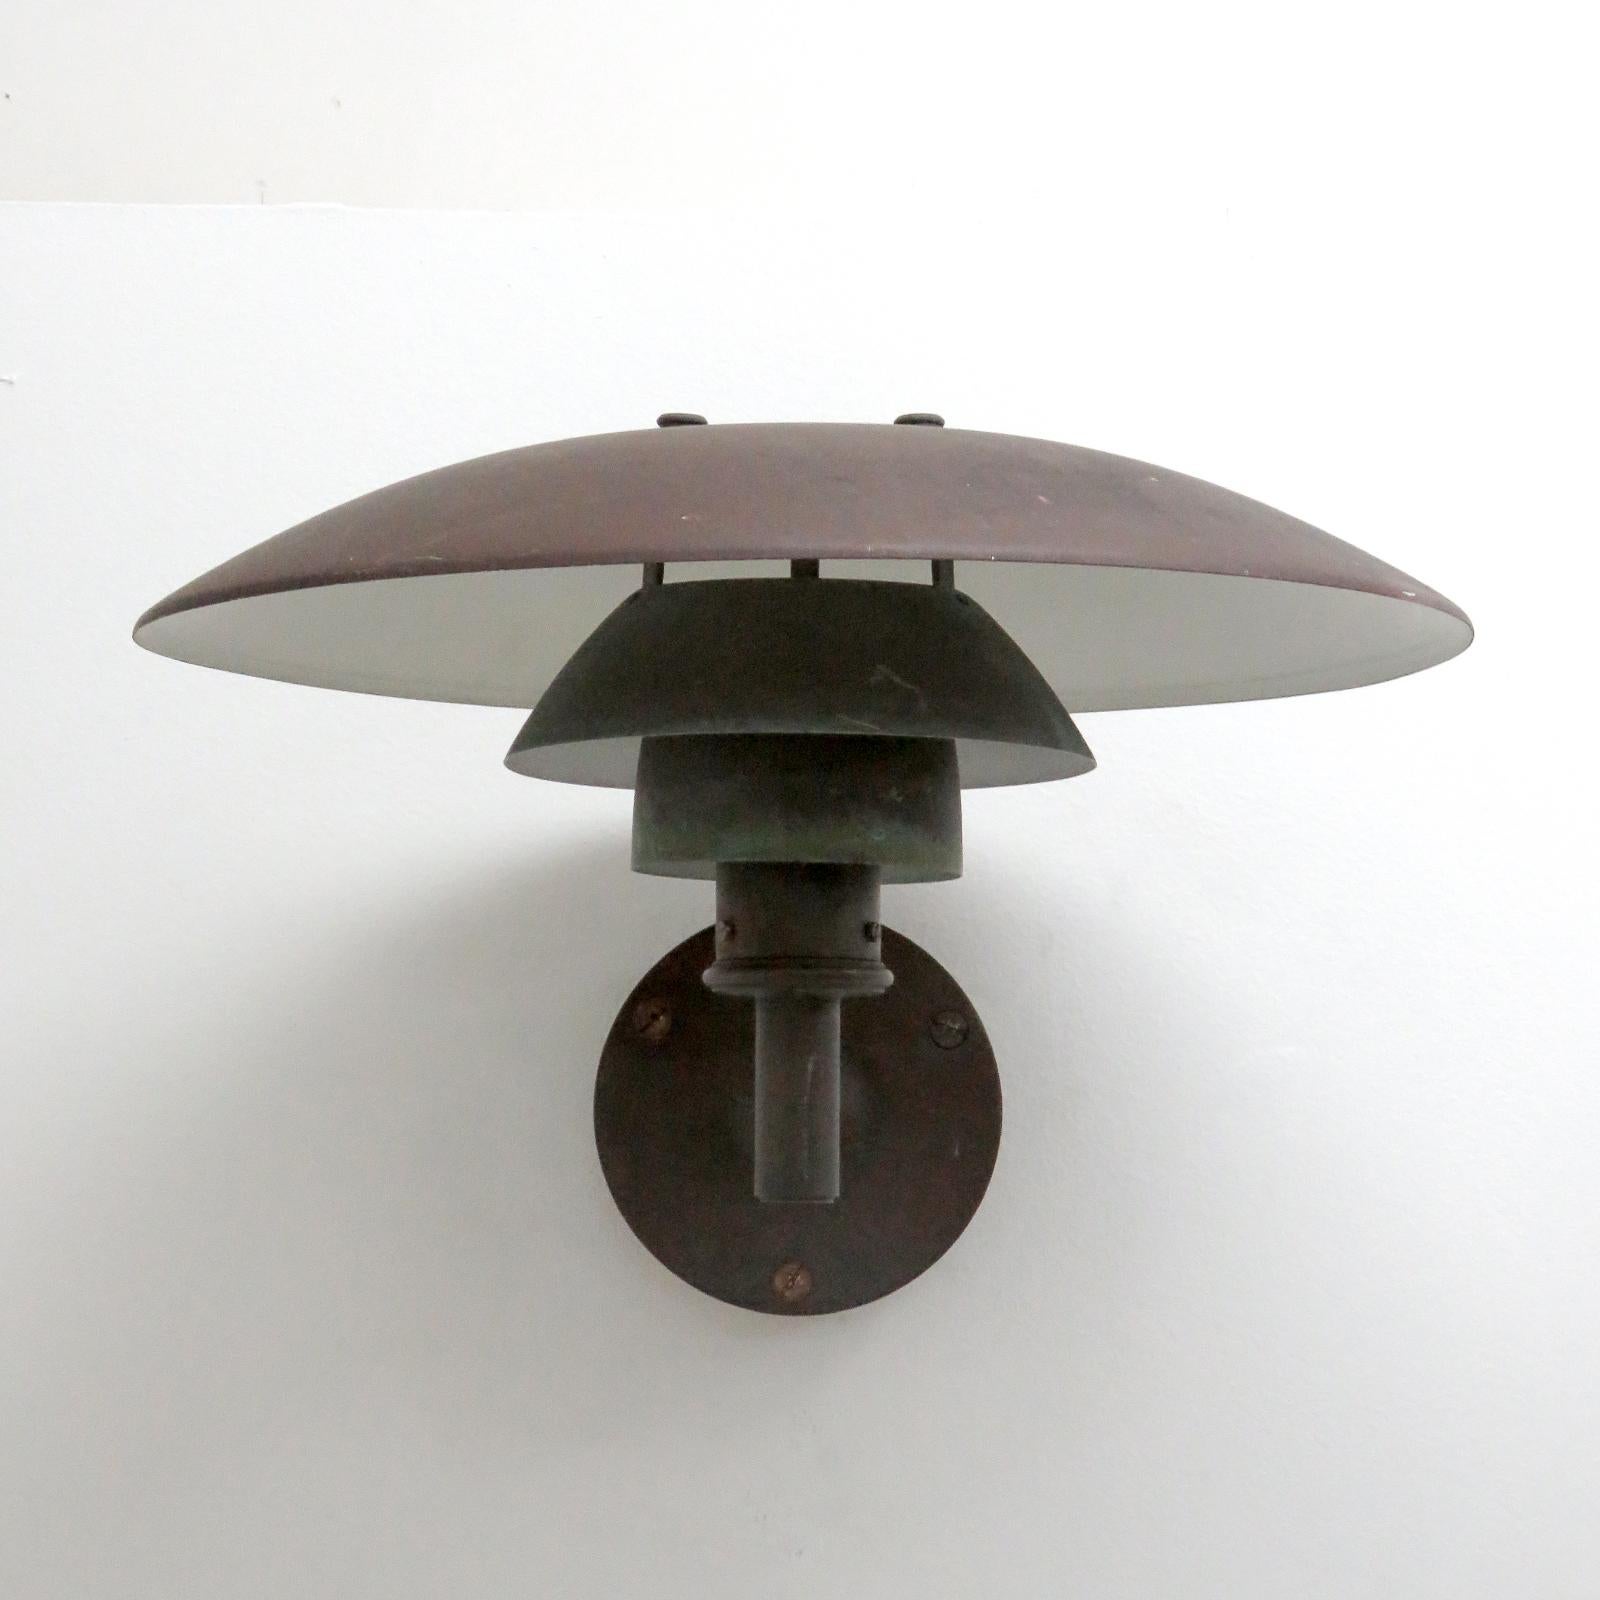 Legendary 1950s PH 4½/3 copper outdoor wall light by Poul Henningsen, fully restored with plenty of the great copper patina still present, wired for US standards, one E27 socket, max. wattage 100w or LED equivalent, incandescent bulb provided as a